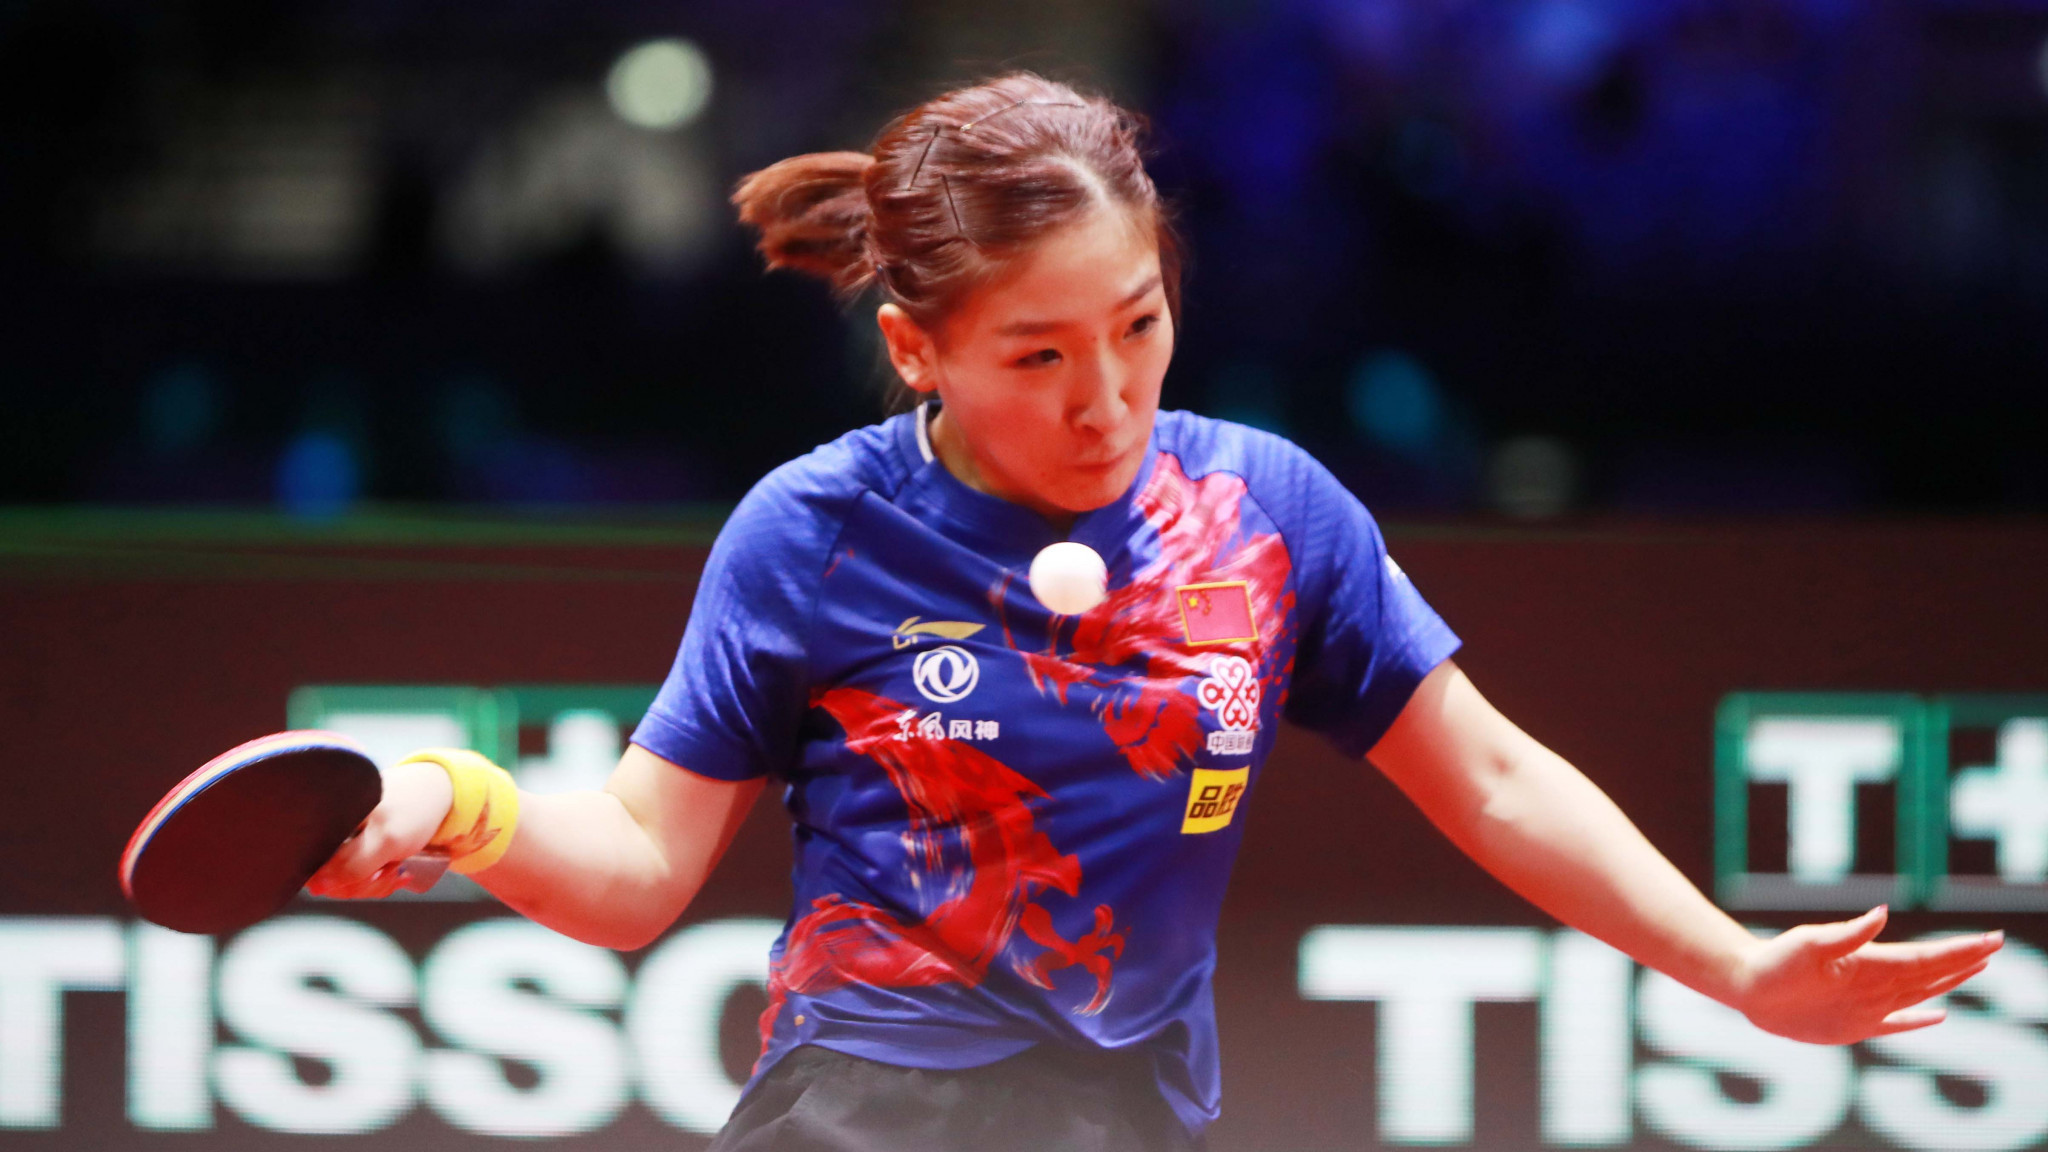 China's Newly-crowned world champion Liu Shiwen will be among the main contenders for victory in the women's singles event at the ITTF China Open in Shenzhen ©ITTF